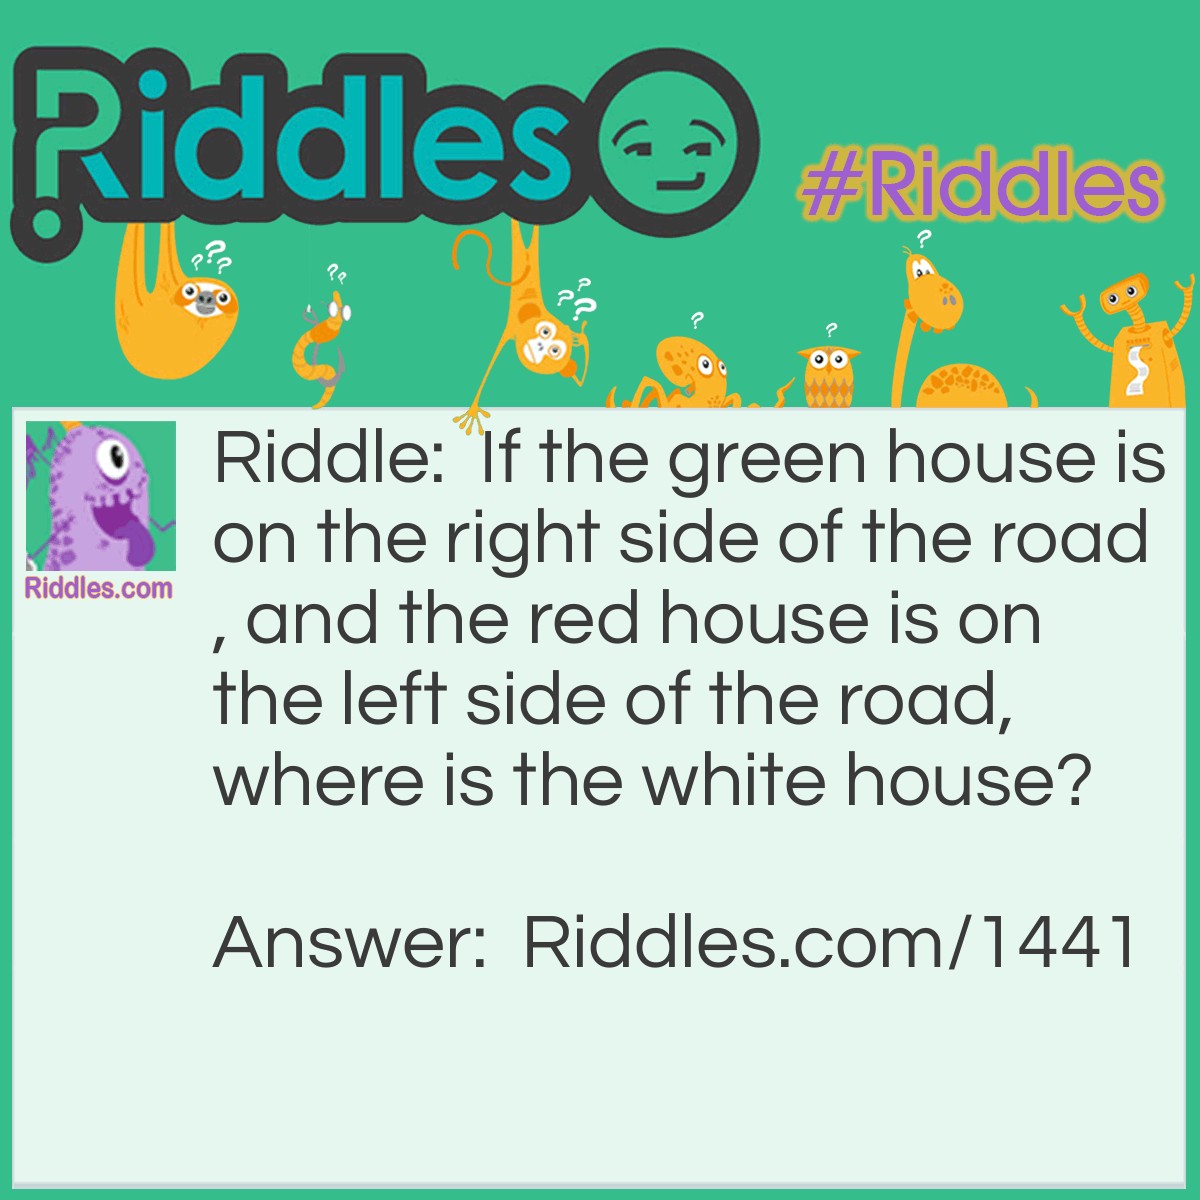 Riddle: If the green house is on the right side of the road, and the red house is on the left side of the road, where is the white house? Answer: In Washington, D.C.